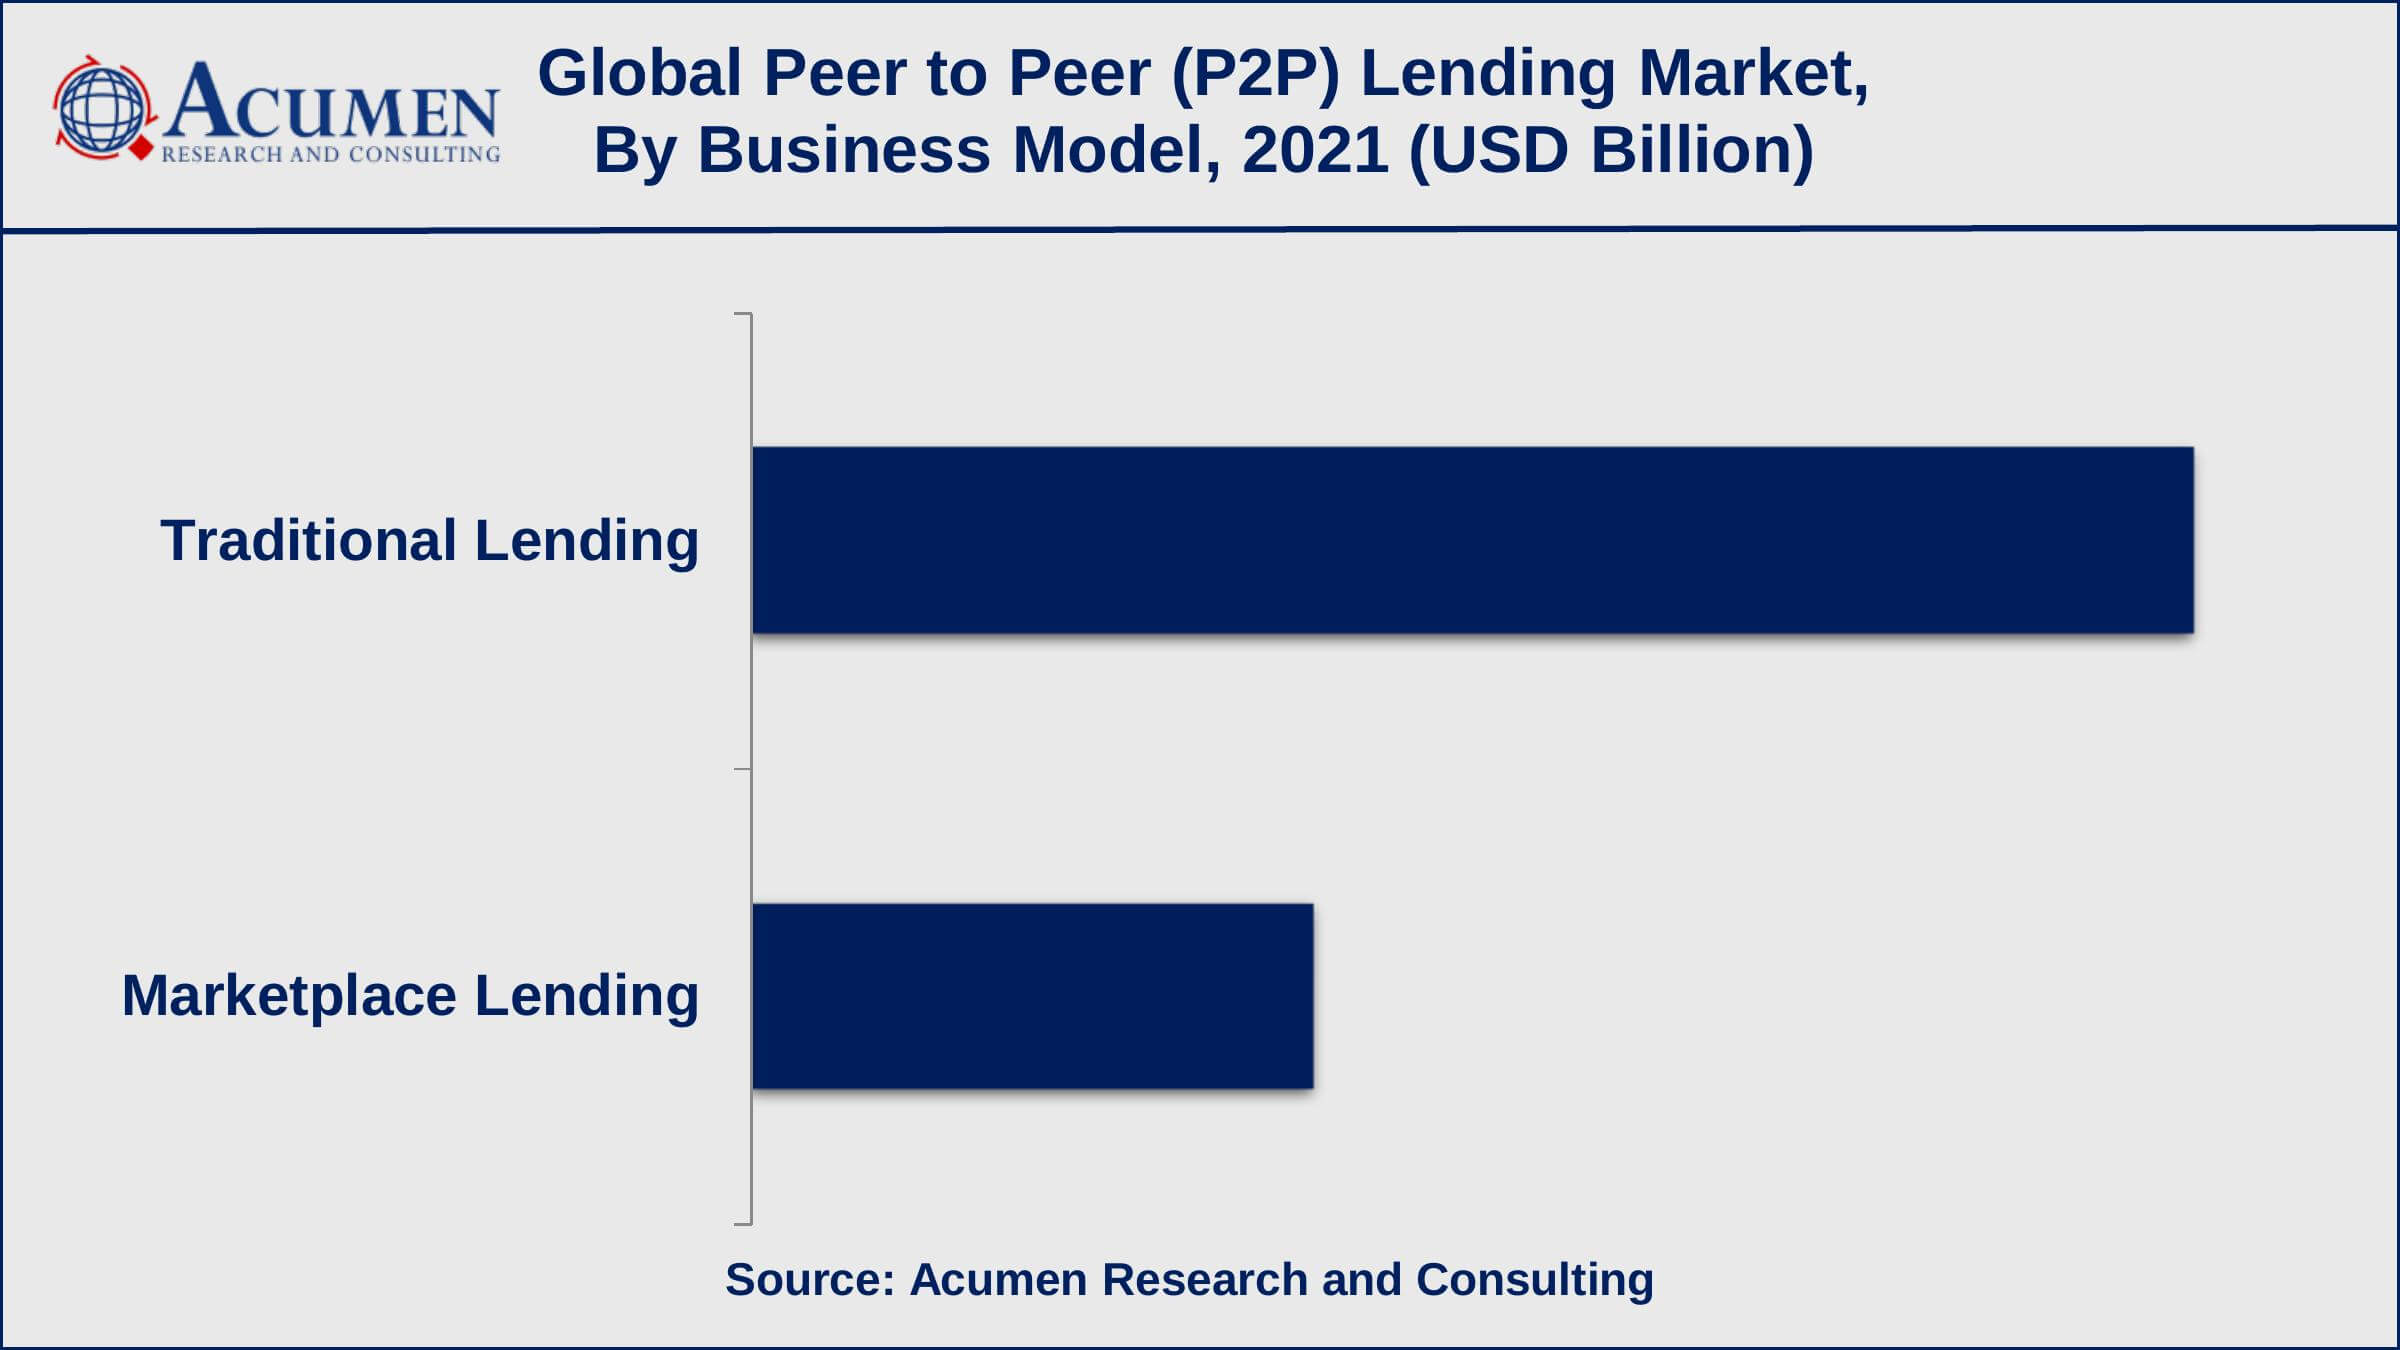 Among business models, traditional lending collected revenue of around US$ 59.3 billion in 2021